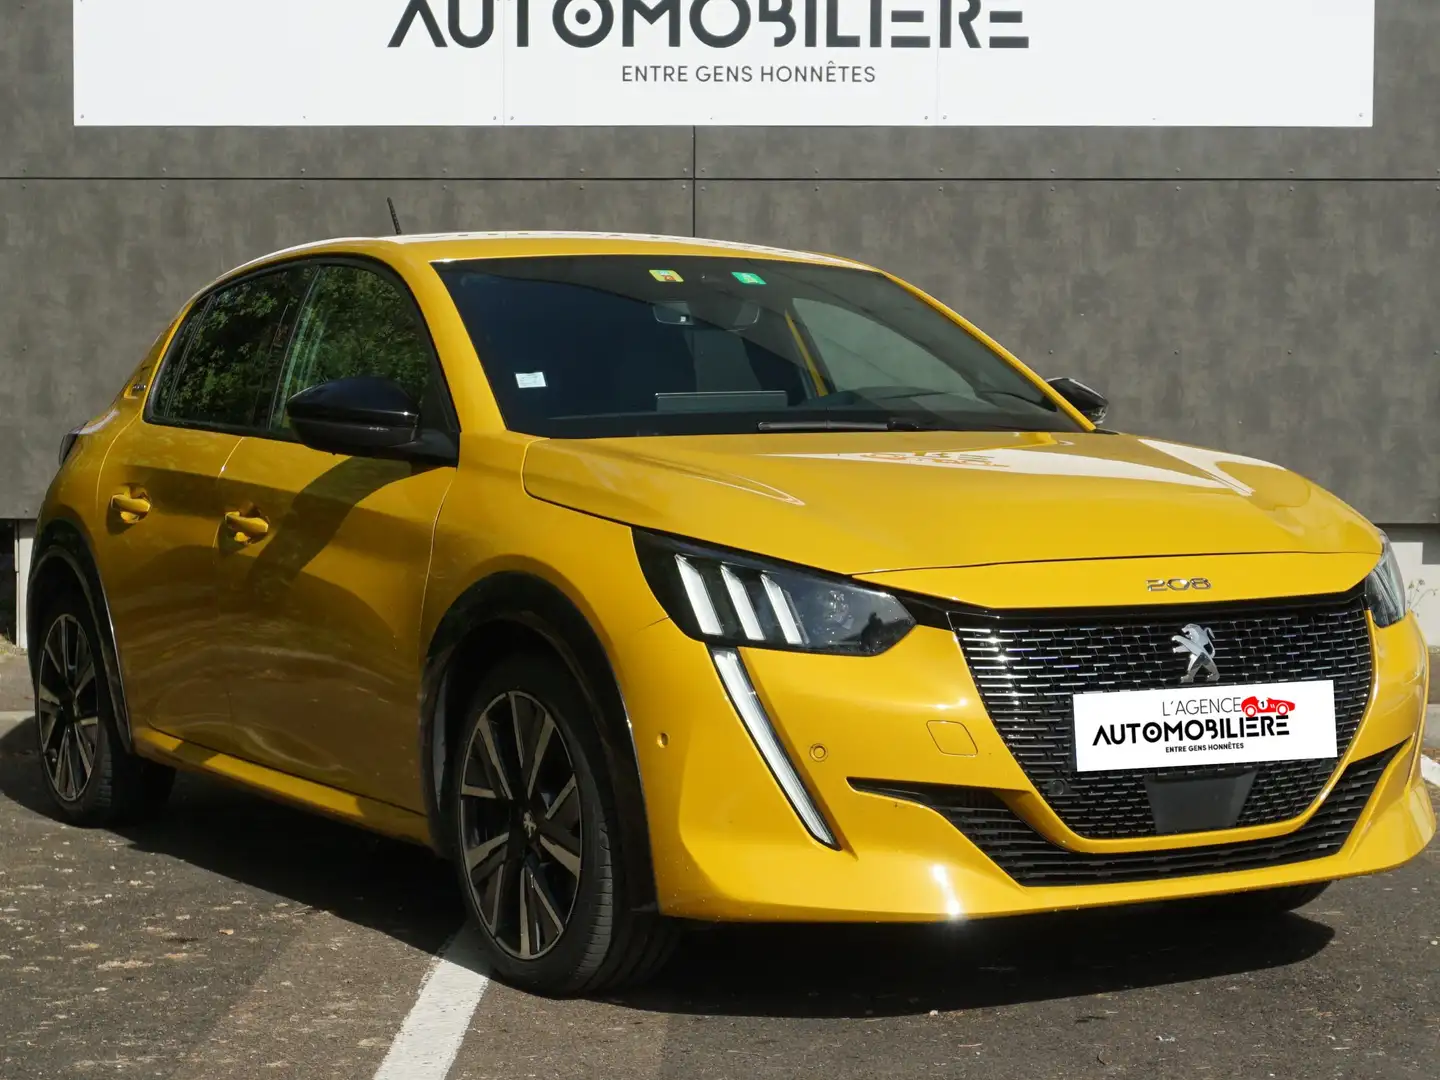 Peugeot 208 1.2 12V S&S 100 ch - GT LINE Yellow - 2